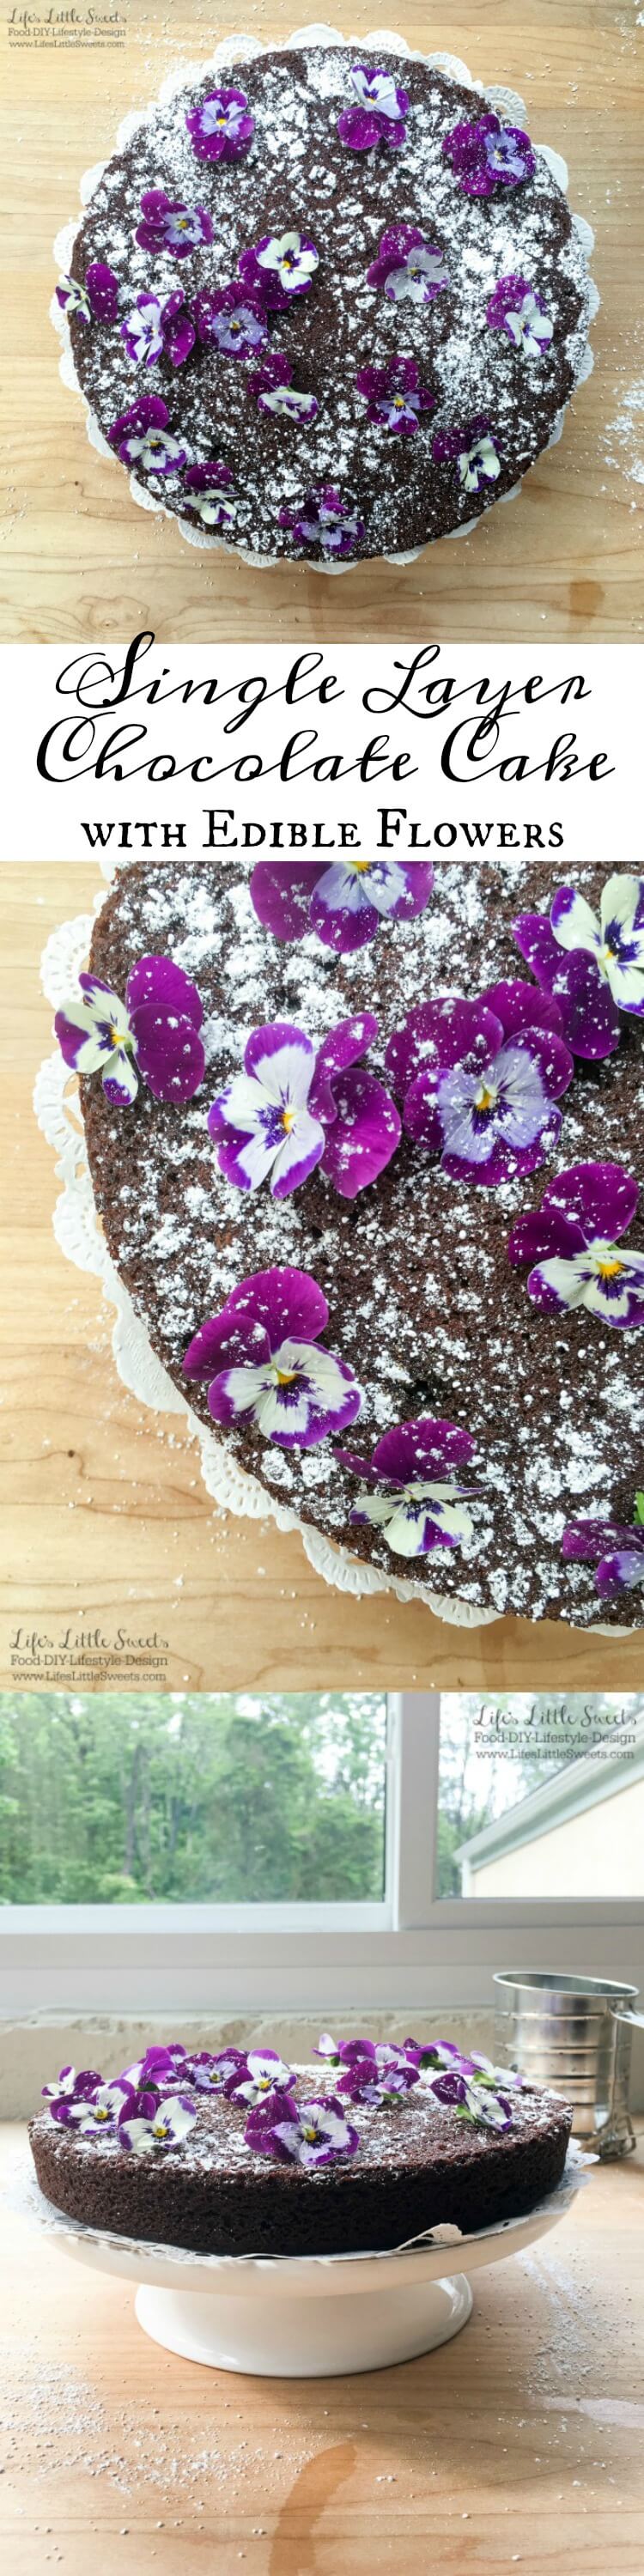 ? This Single-Layer Chocolate Cake with Edible Flowers is a pretty and simple chocolate cake that can be whipped up when you have the need or craving for chocolate cake. No need for frosting for this elegant cake as it is decorated with confectioner's sugar and edible flowers.